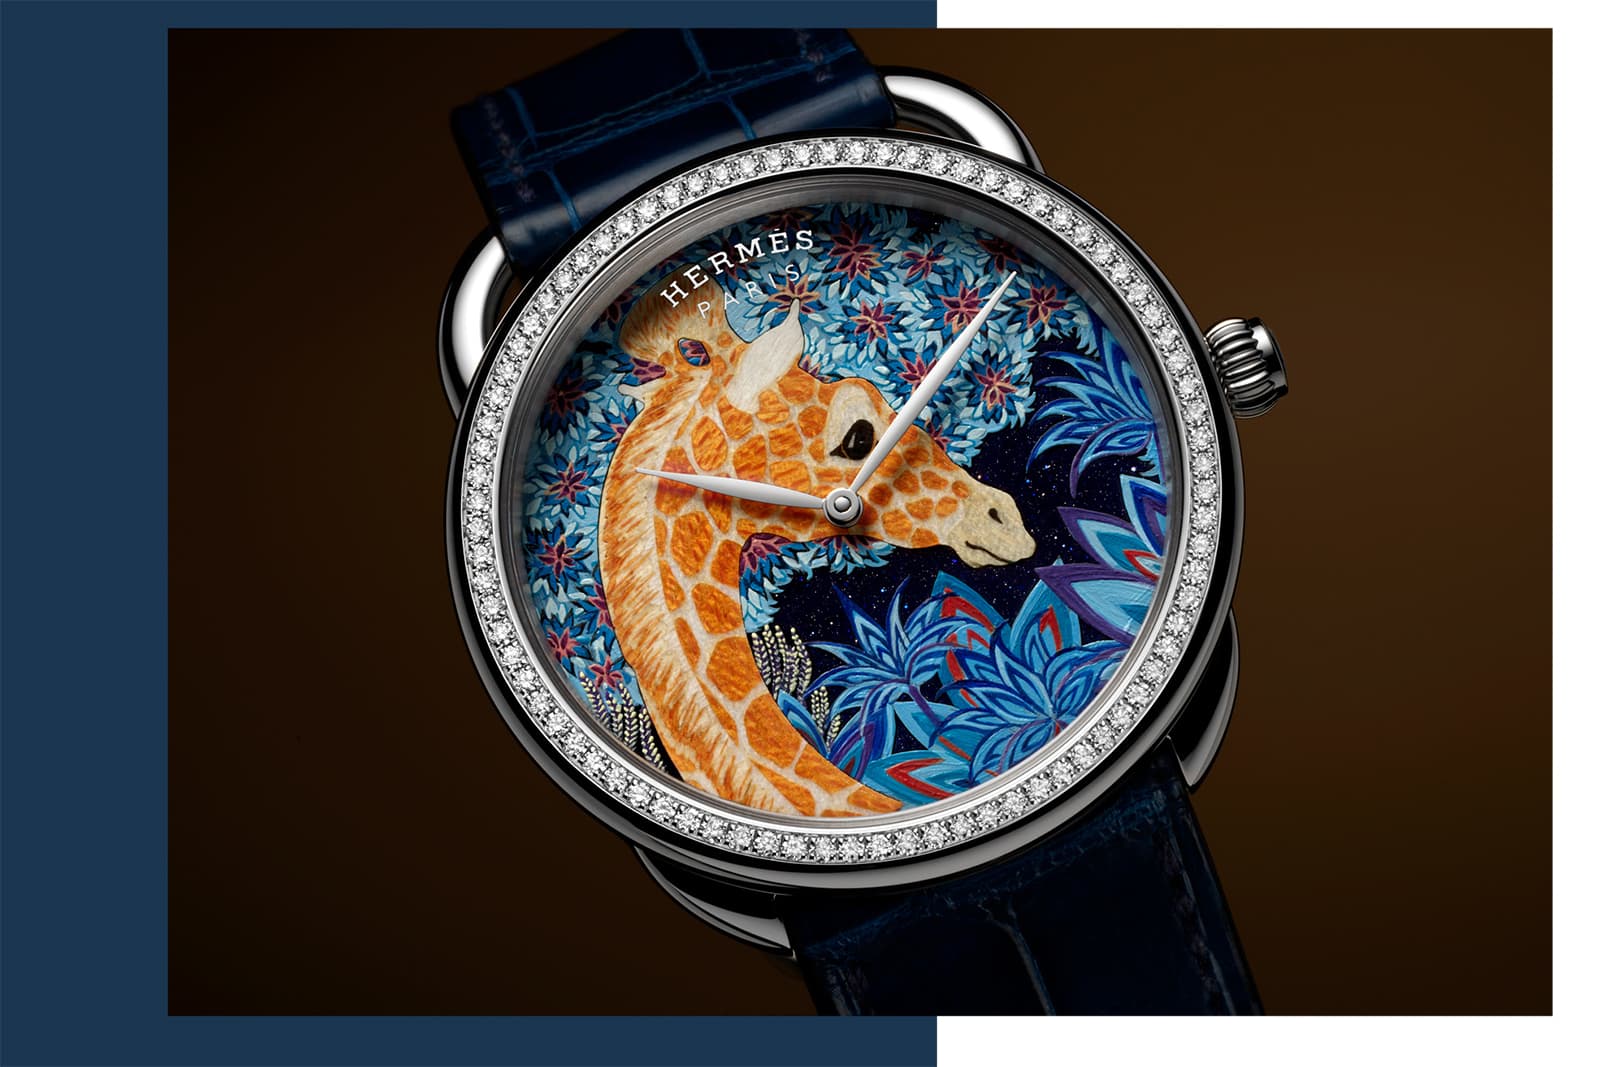 Hermès Arceau The Three Graces timepiece with a marquetry giraffe on the dial